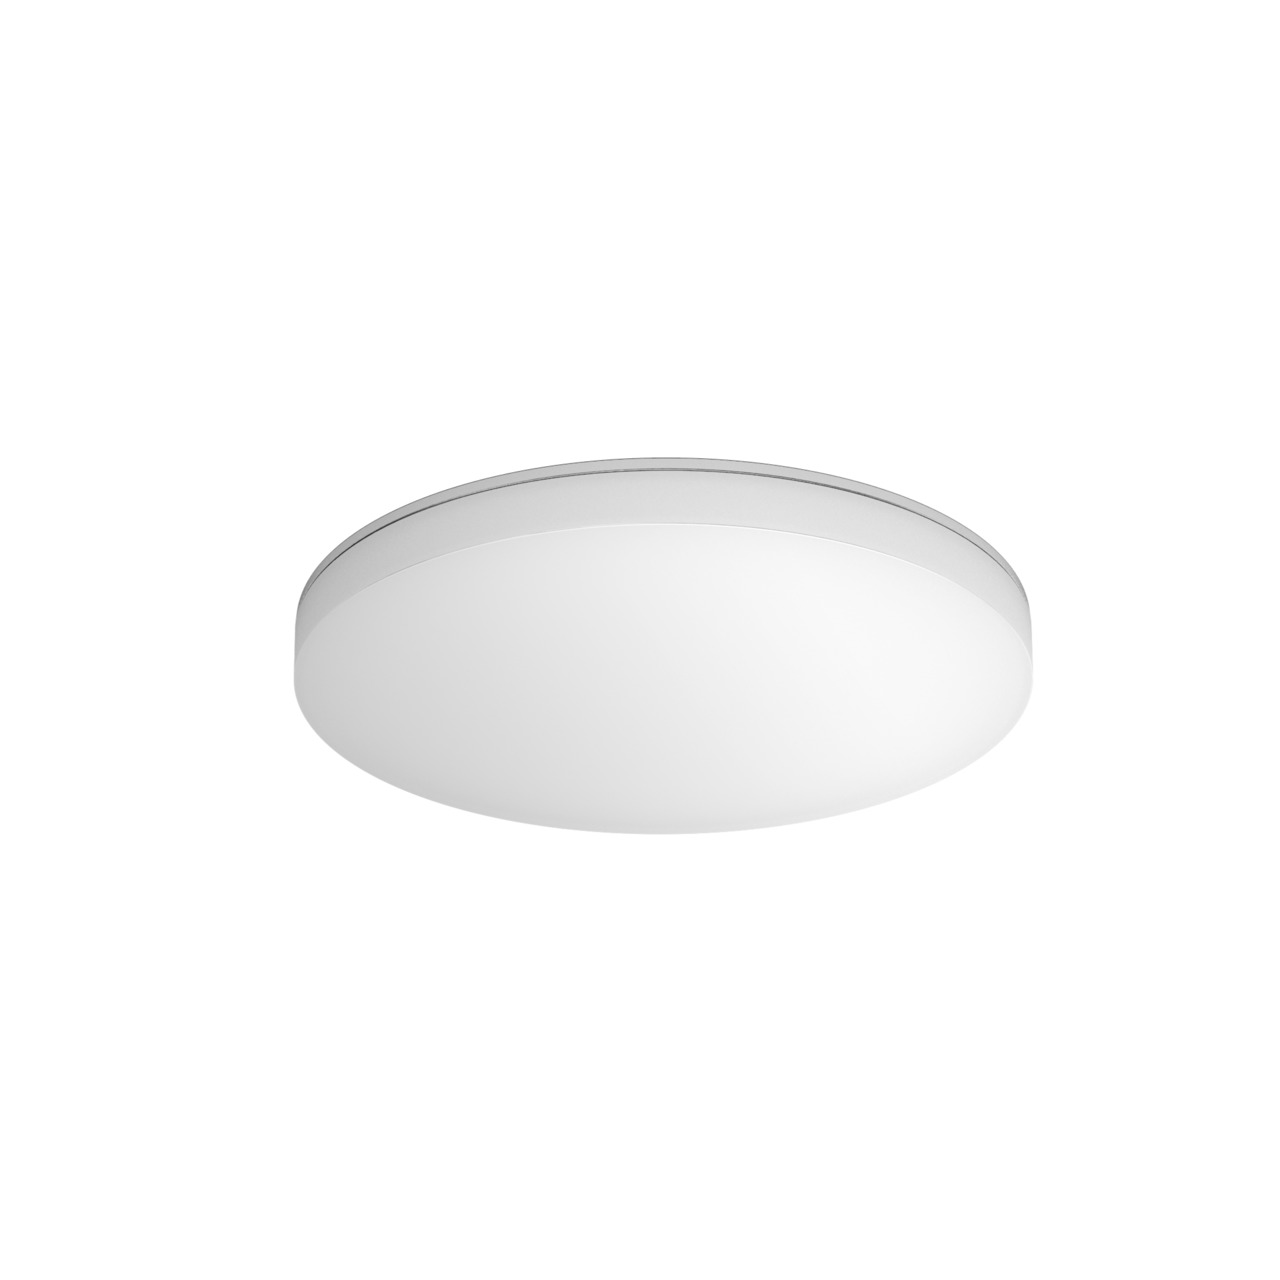 Steinel LED indoor luminaire RS PRO R10 PLUS SC NW